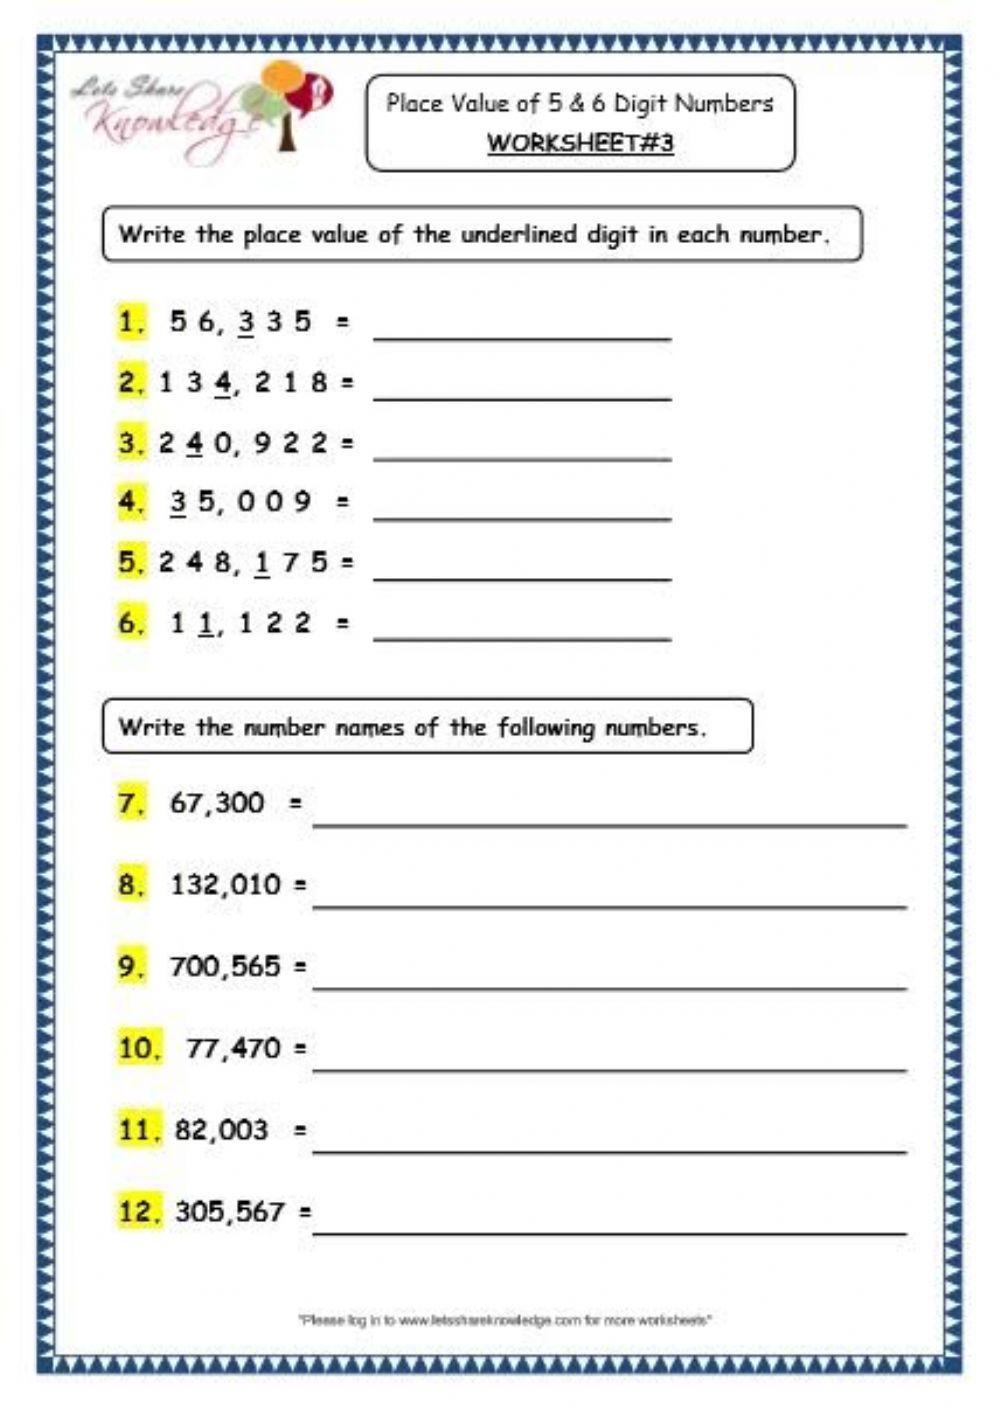 Place value of 6 digit